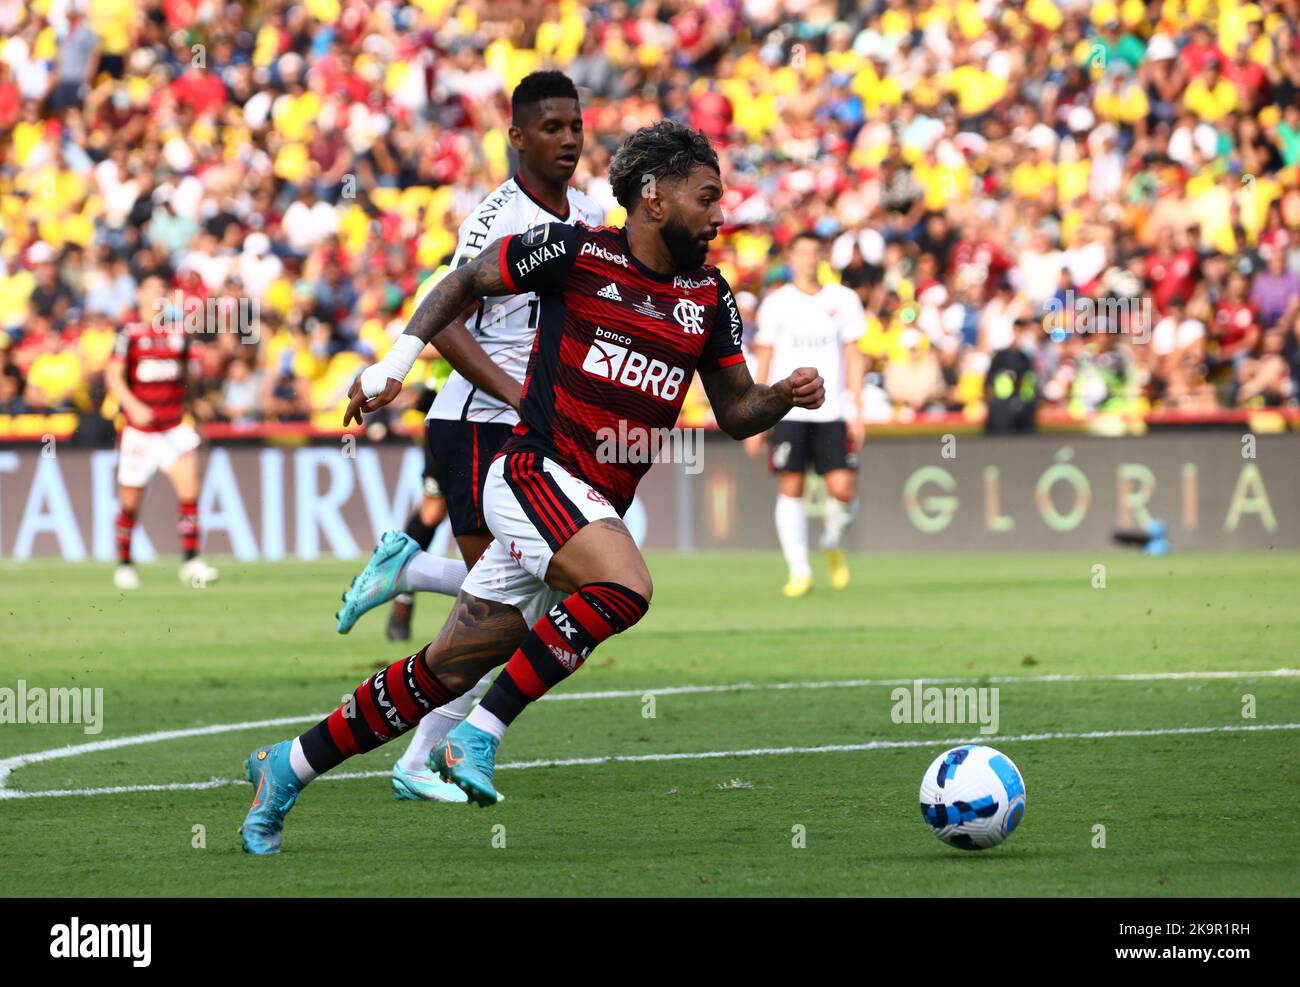 Guayaquil, Ecuador. 29th Oct, 2022. 29th October 2022: Tarqui, northern Guayaquil, Ecuador; Gabriel Barbosa of Flamengo challenges Abner Vin&#xed;cius of Athletico, during the Final of the Copa Libertadores between Flamengo and Atletico Credit: Action Plus Sports Images/Alamy Live News Stock Photo